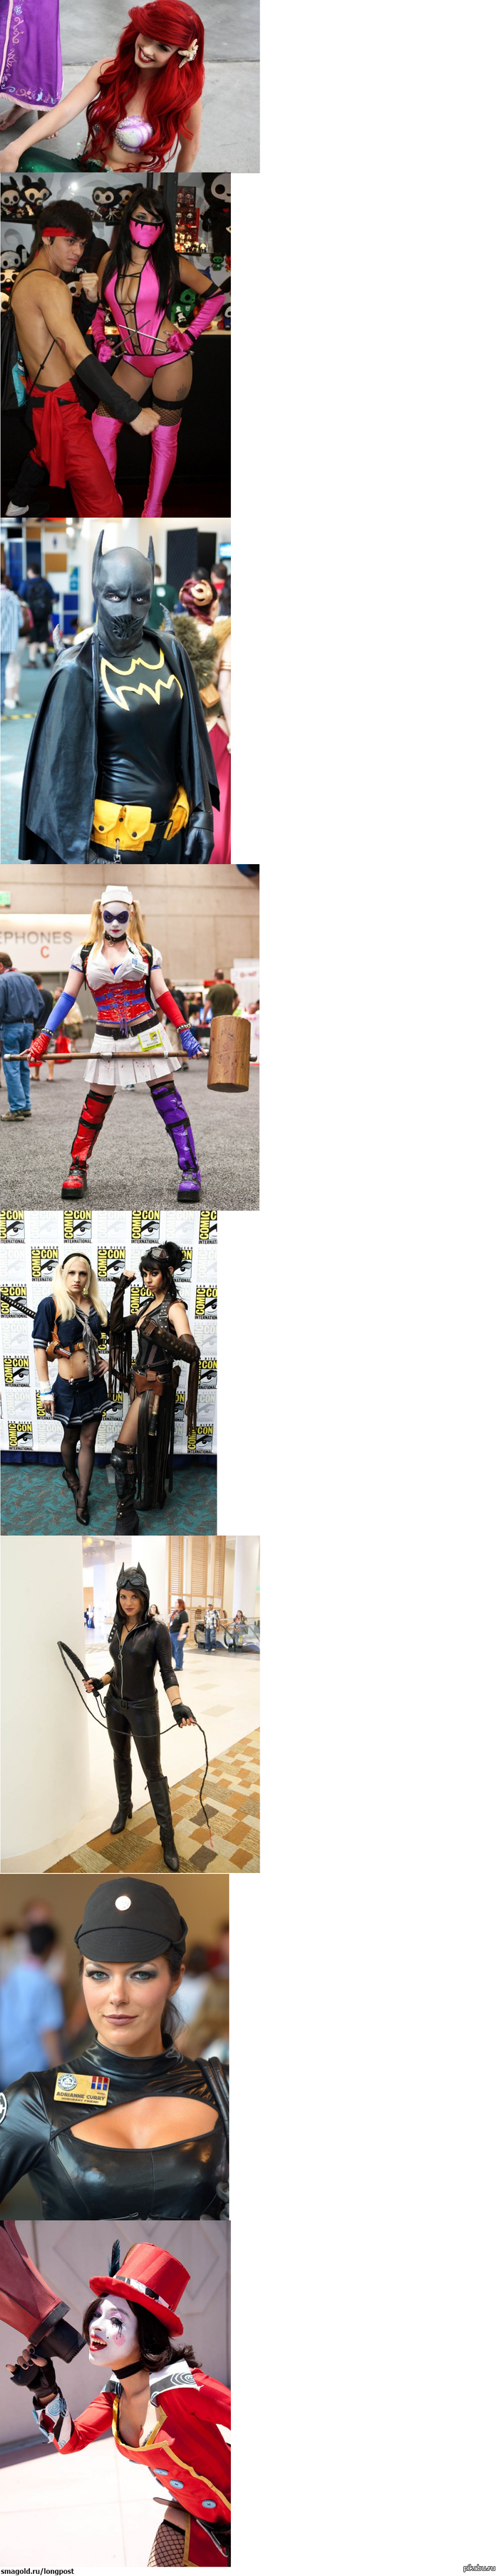 Girls and Comic Con #7 